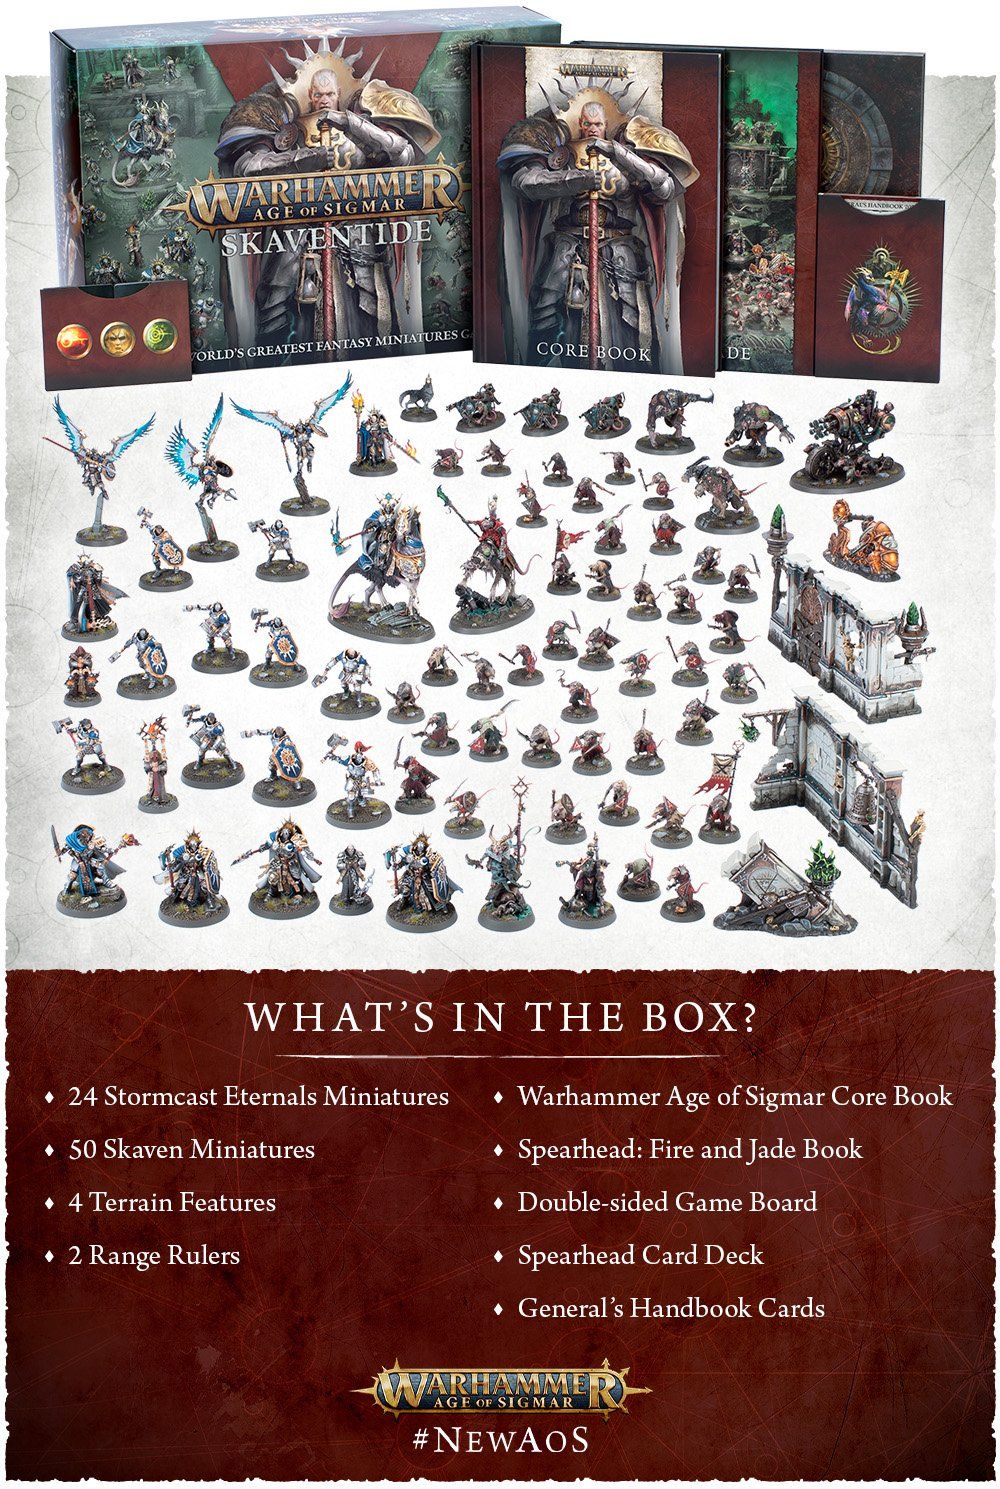 Skaventide: Age of Sigmar 4th Edition Midnight Release